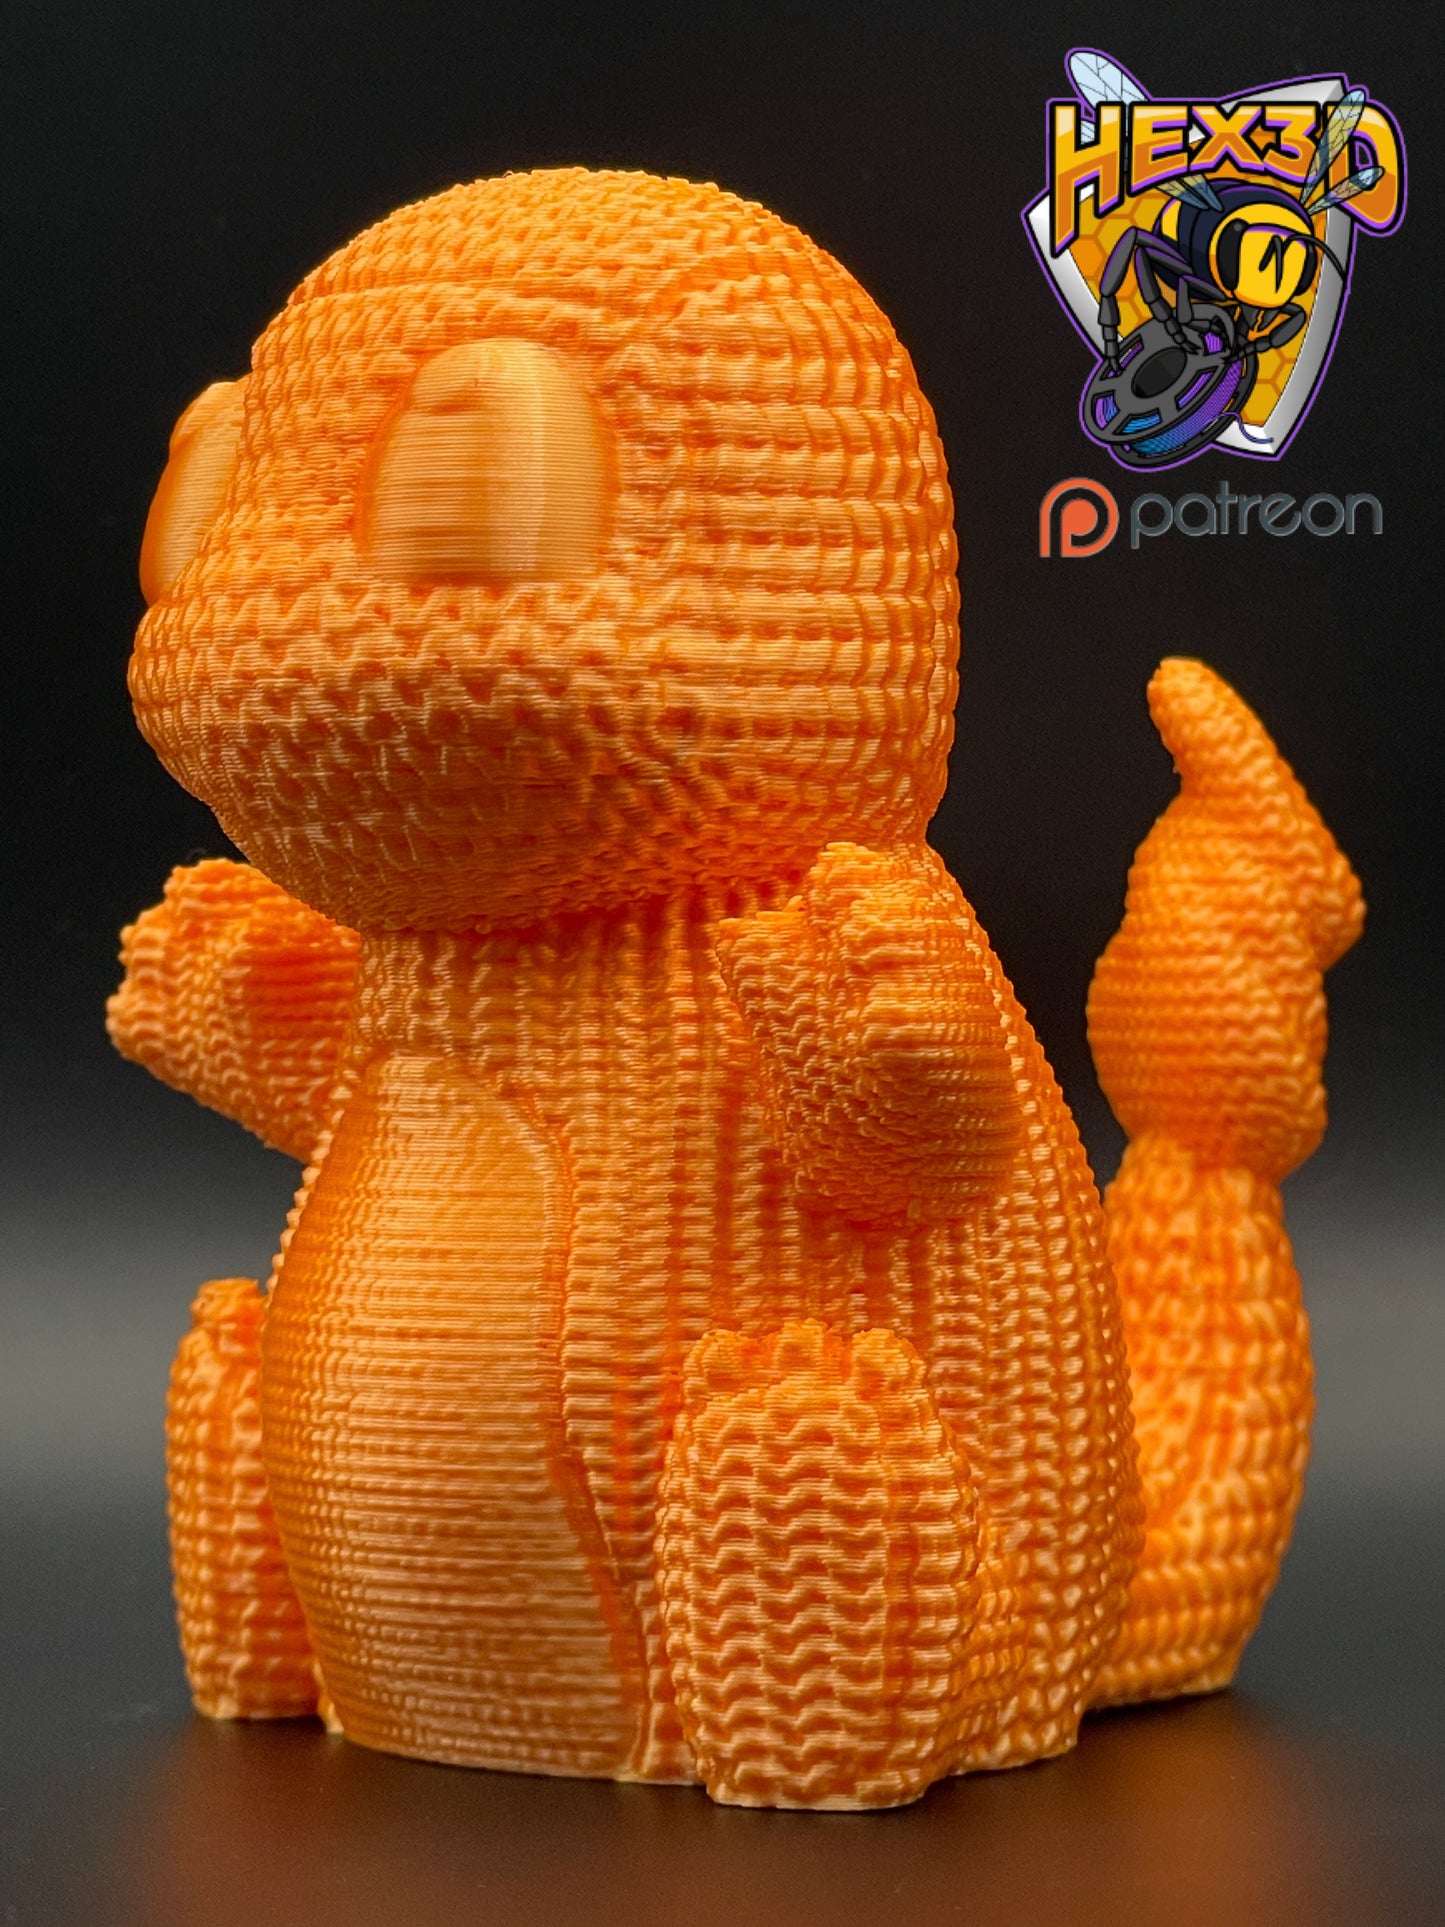 "Knitted" Charmander by Hex3D